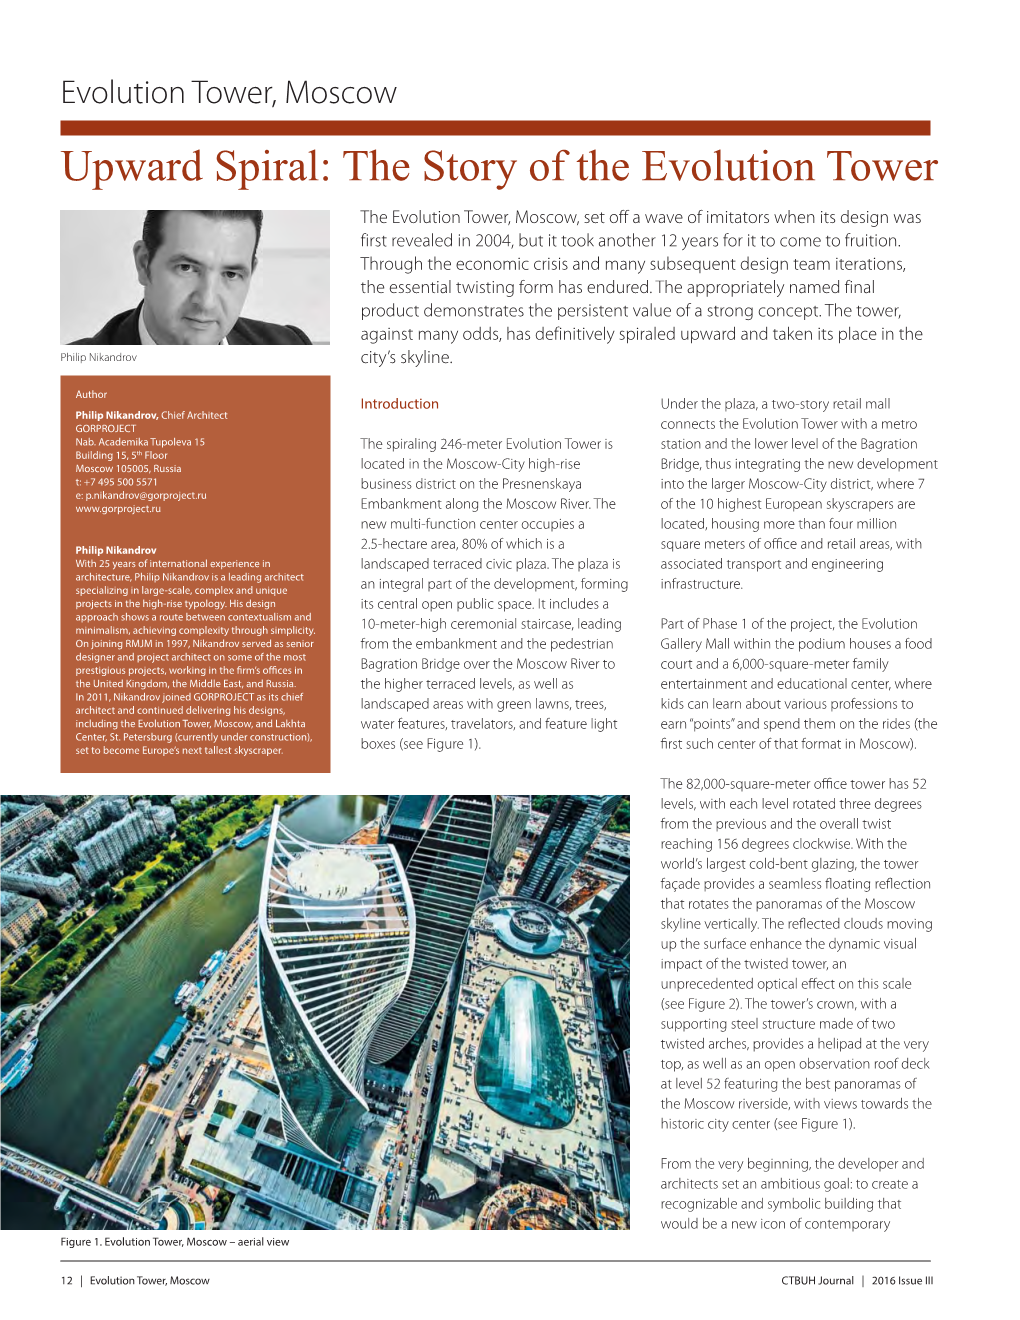 The Story of the Evolution Tower